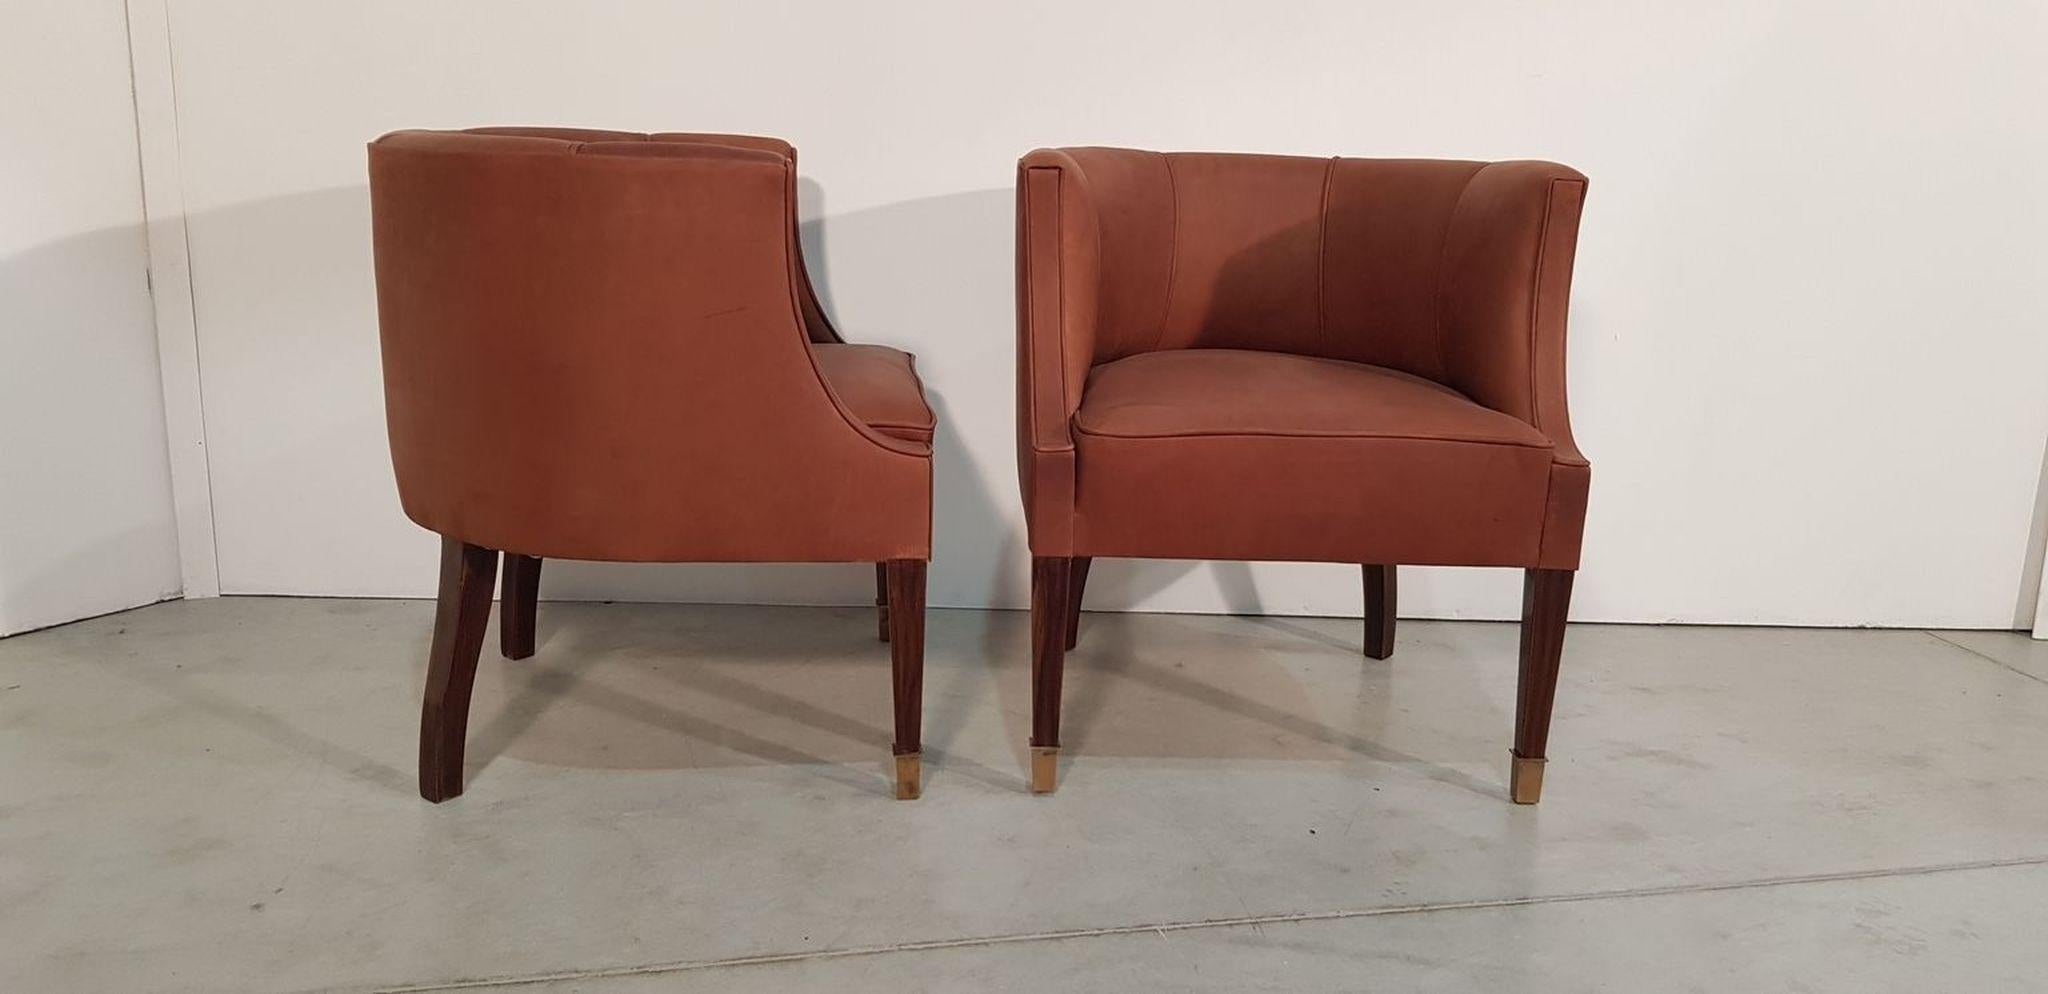 Pair of Art Deco Armchairs on Walnut Legs Covered Brown Leather, Hungary, 1930s im Angebot 1